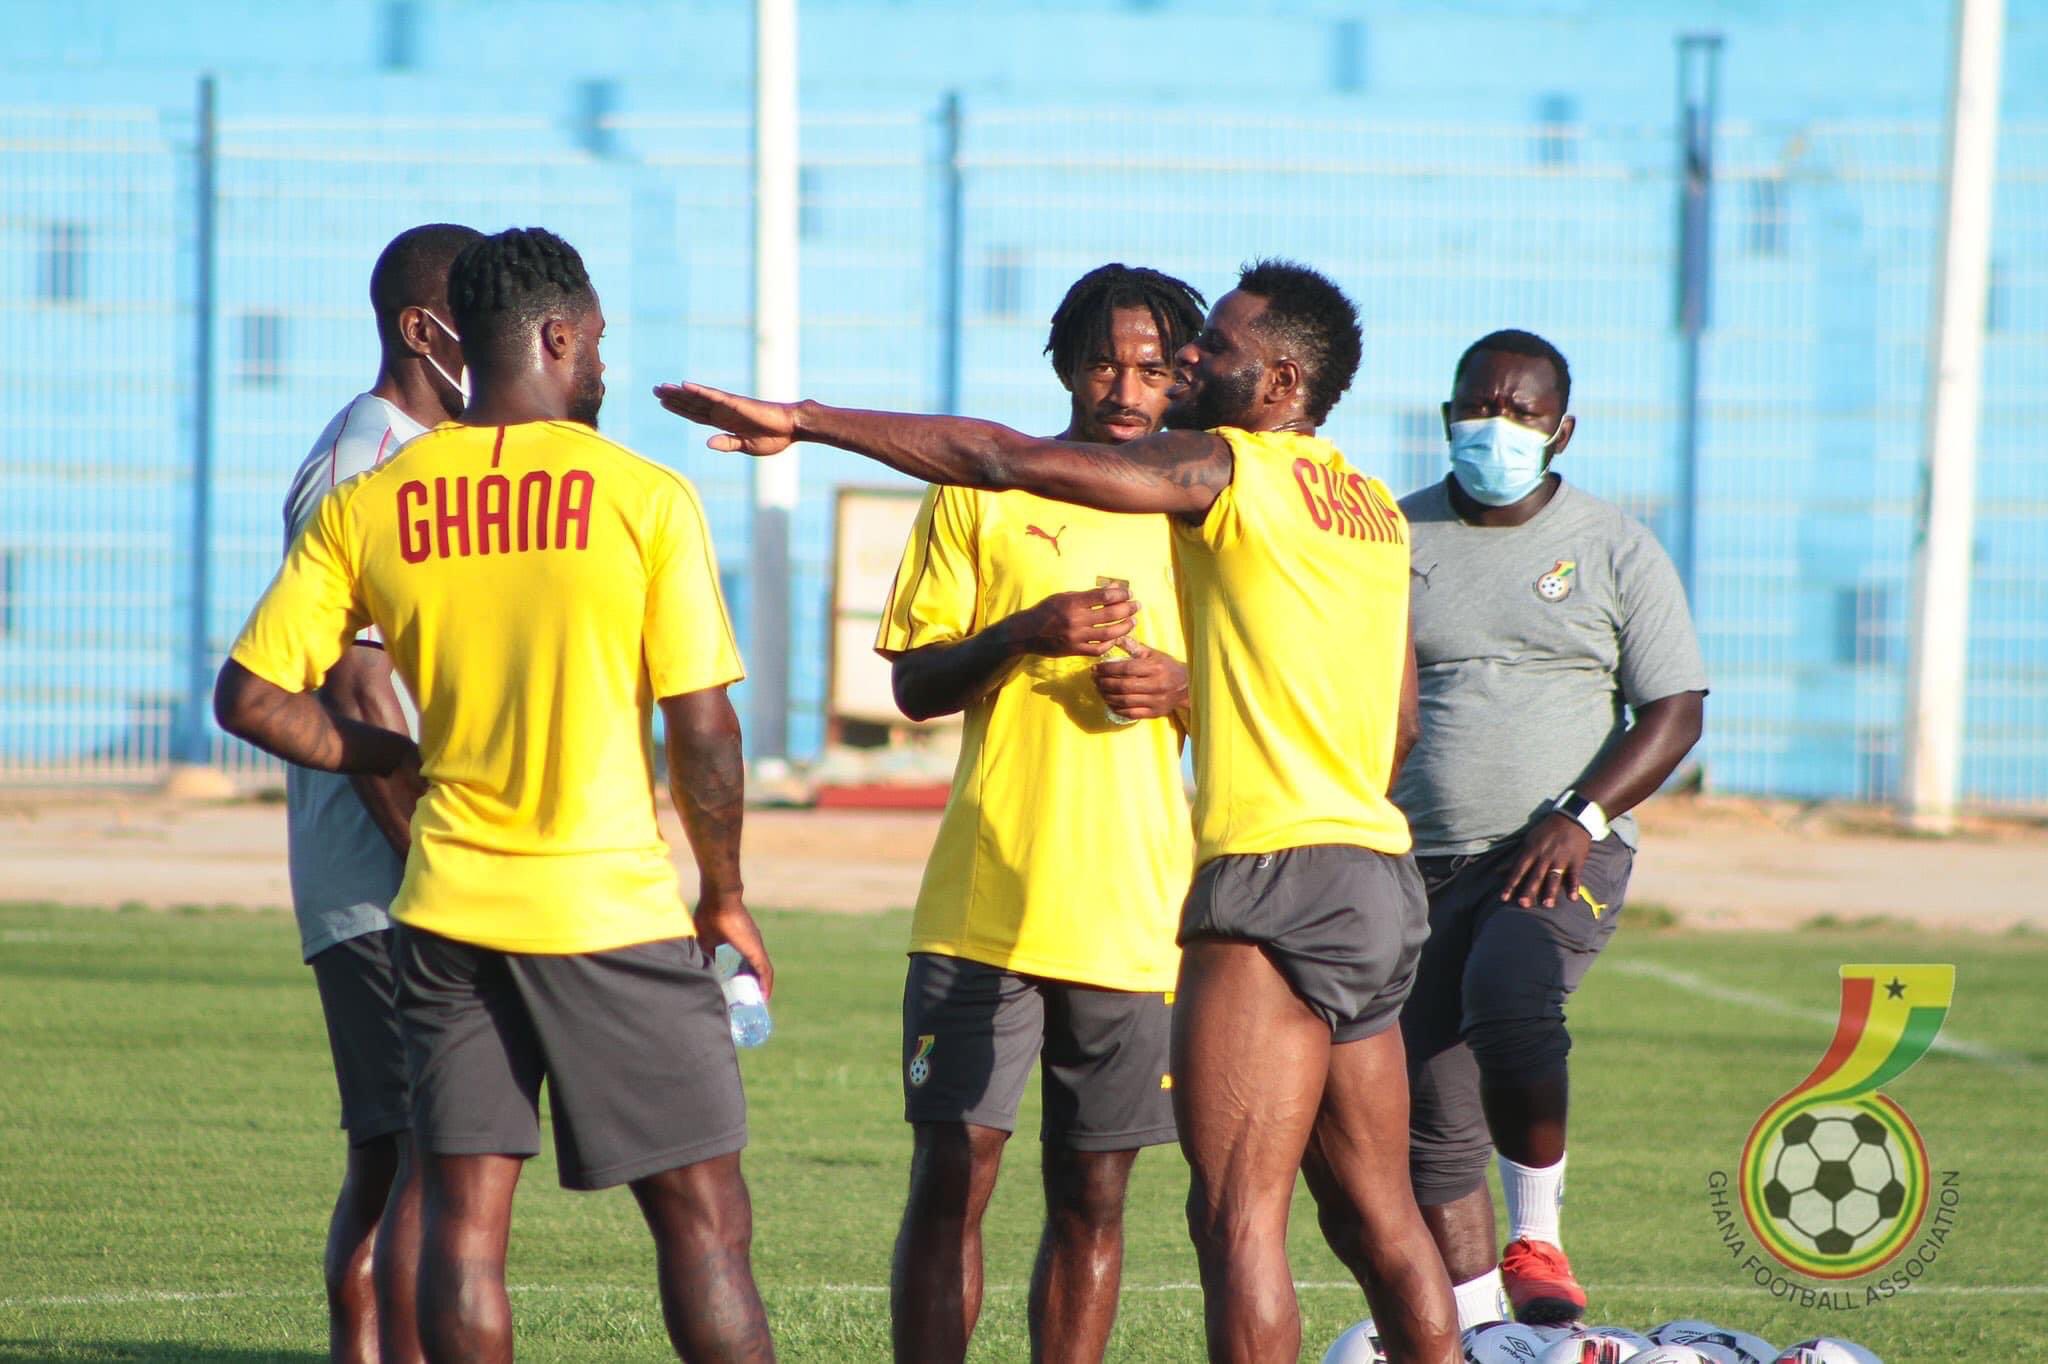 Most of Ghana national team players are based abroad